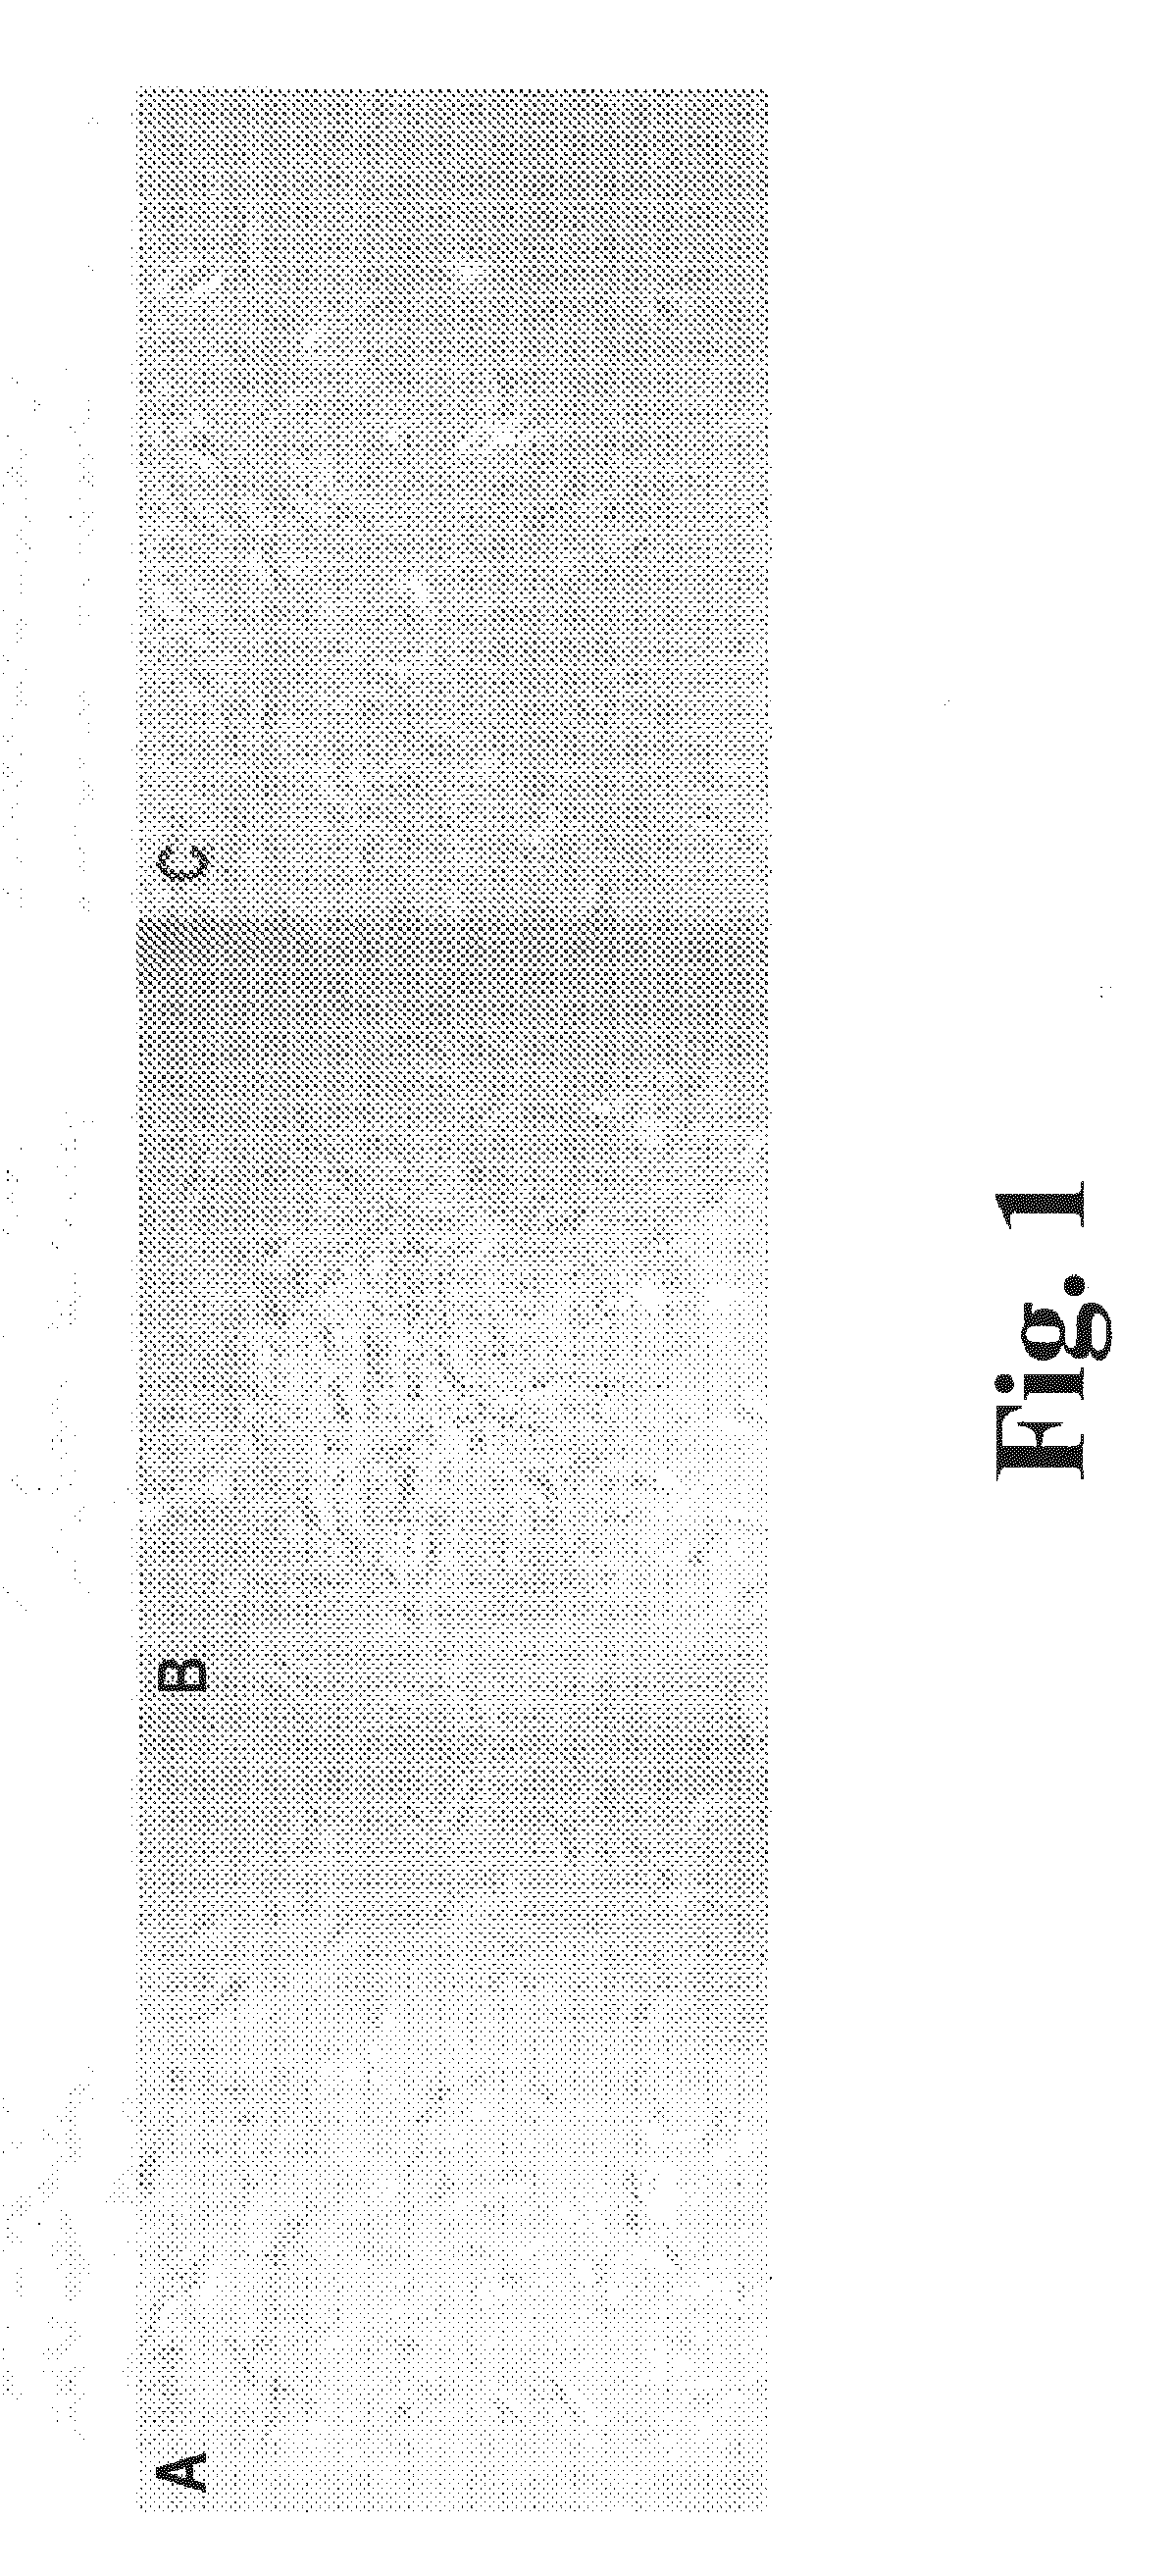 Methods of producing stem cell conditioned media to treat mammalian injuries or insults